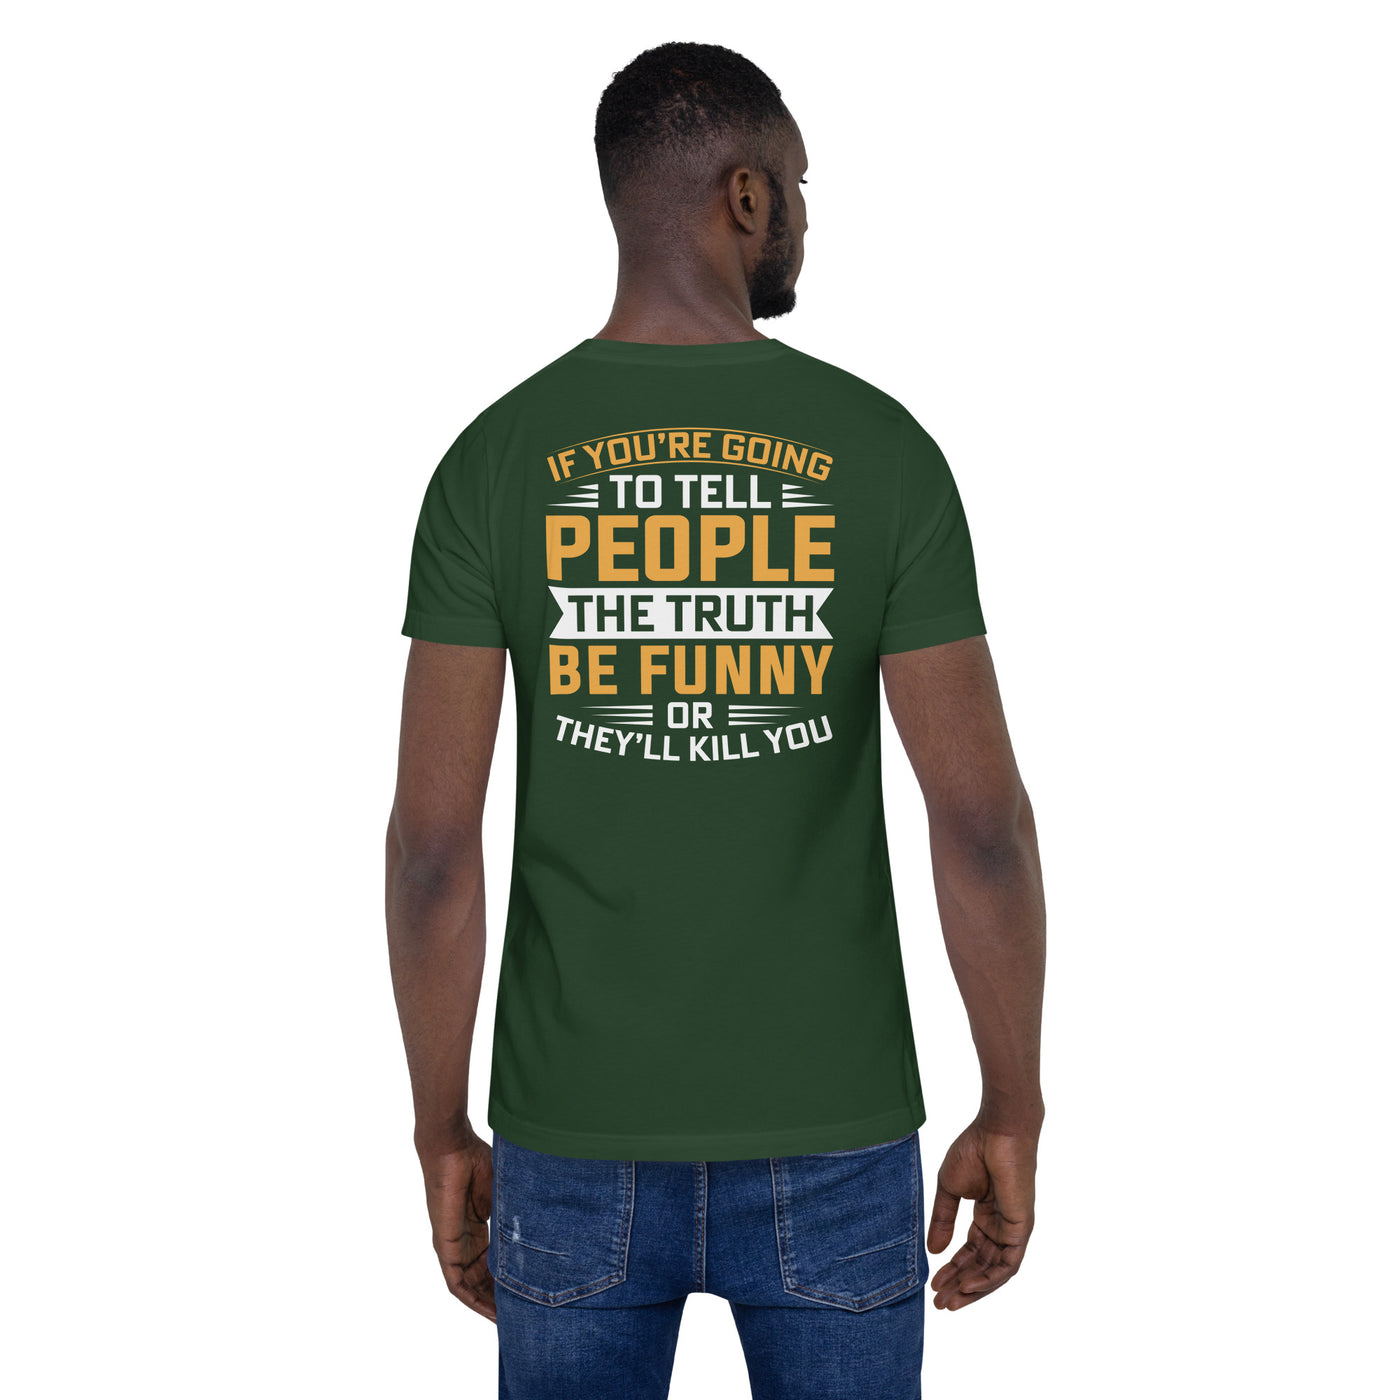 If you are going to tell the people the truth; be funny or they'll kill you - Unisex t-shirt ( Back Print )